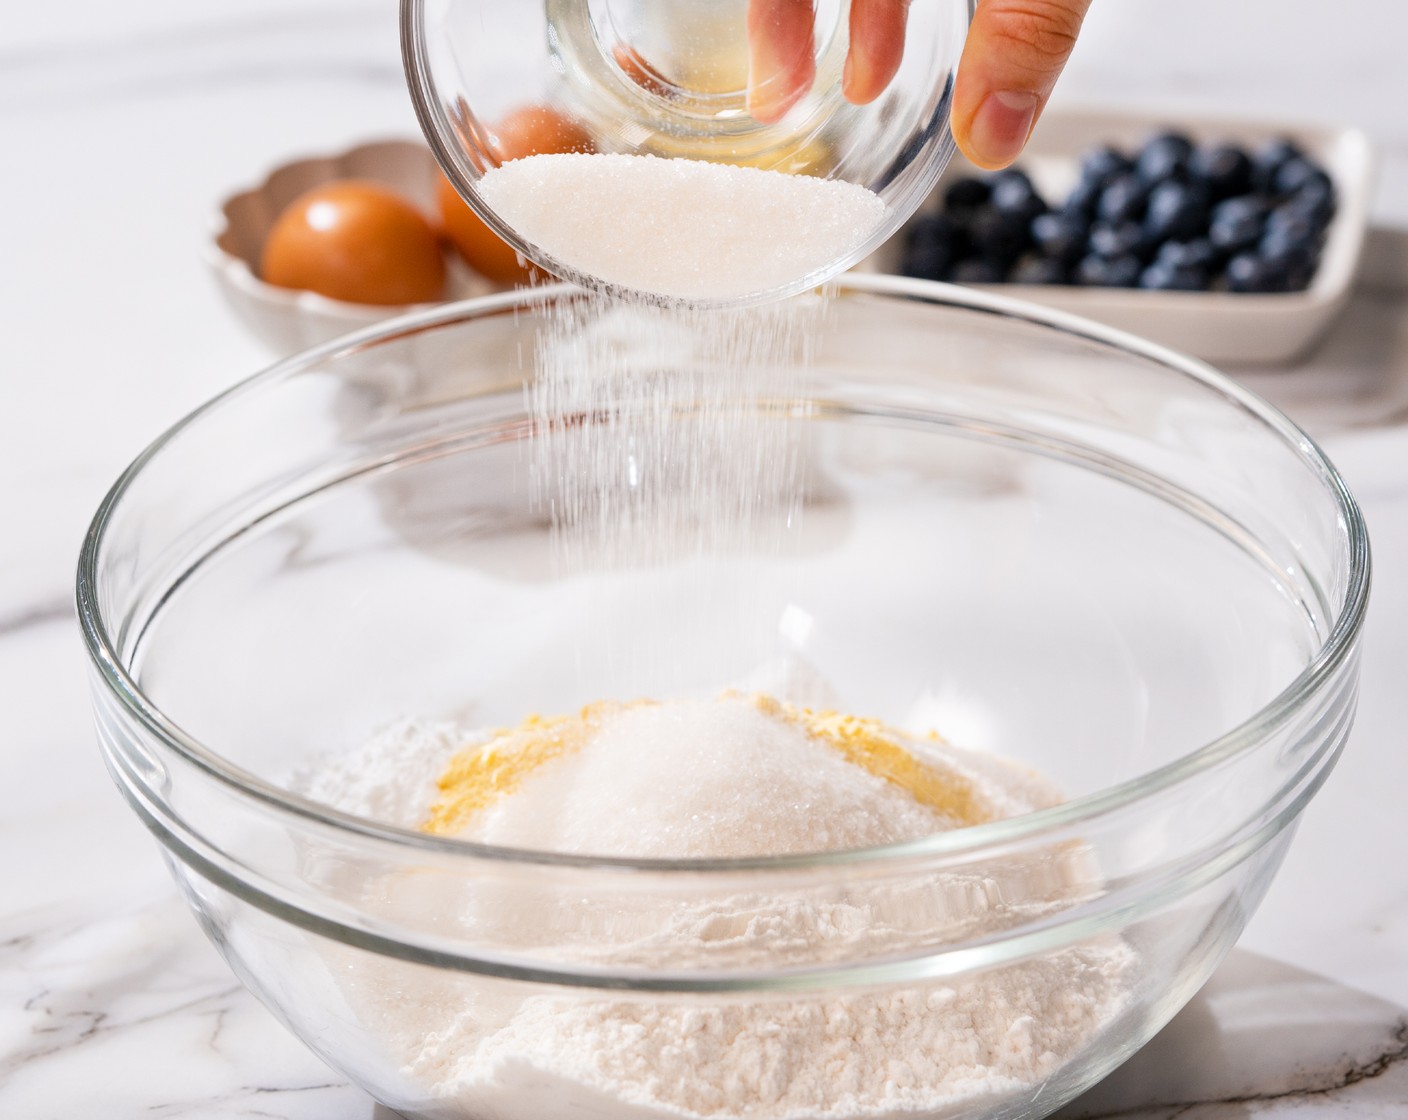 step 2 In a large mixing bowl, add All-Purpose Flour (1 cup), Cornmeal (1 cup), Baking Powder (1/2 Tbsp), Baking Soda (1 tsp), and Salt (1/2 tsp), then whisk to combine.